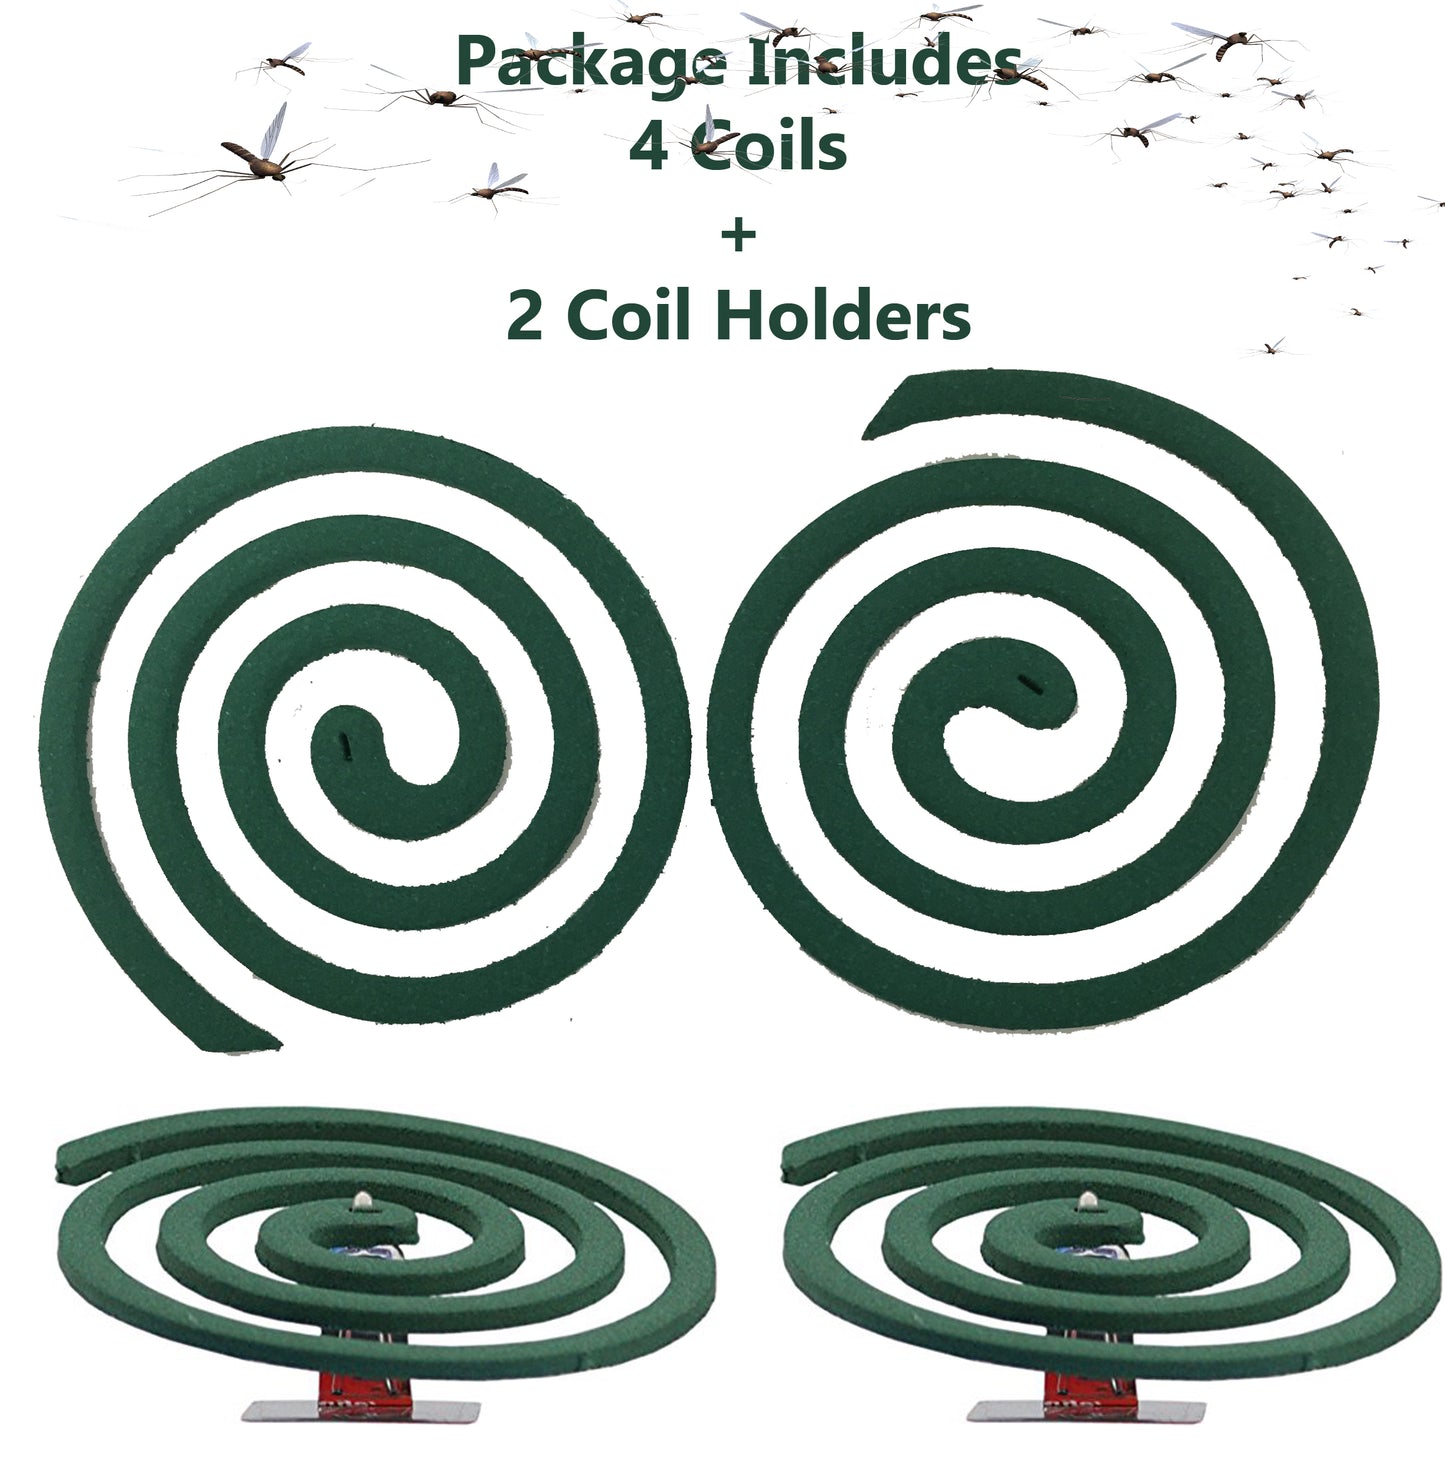 W4W Mosquito Repellent Coils - Outdoor Use Reaches Up to 10 feet - Each Coil Burns for 5-7 Hours (Three Pack Contains 12 coils & 6 Coil Stands)